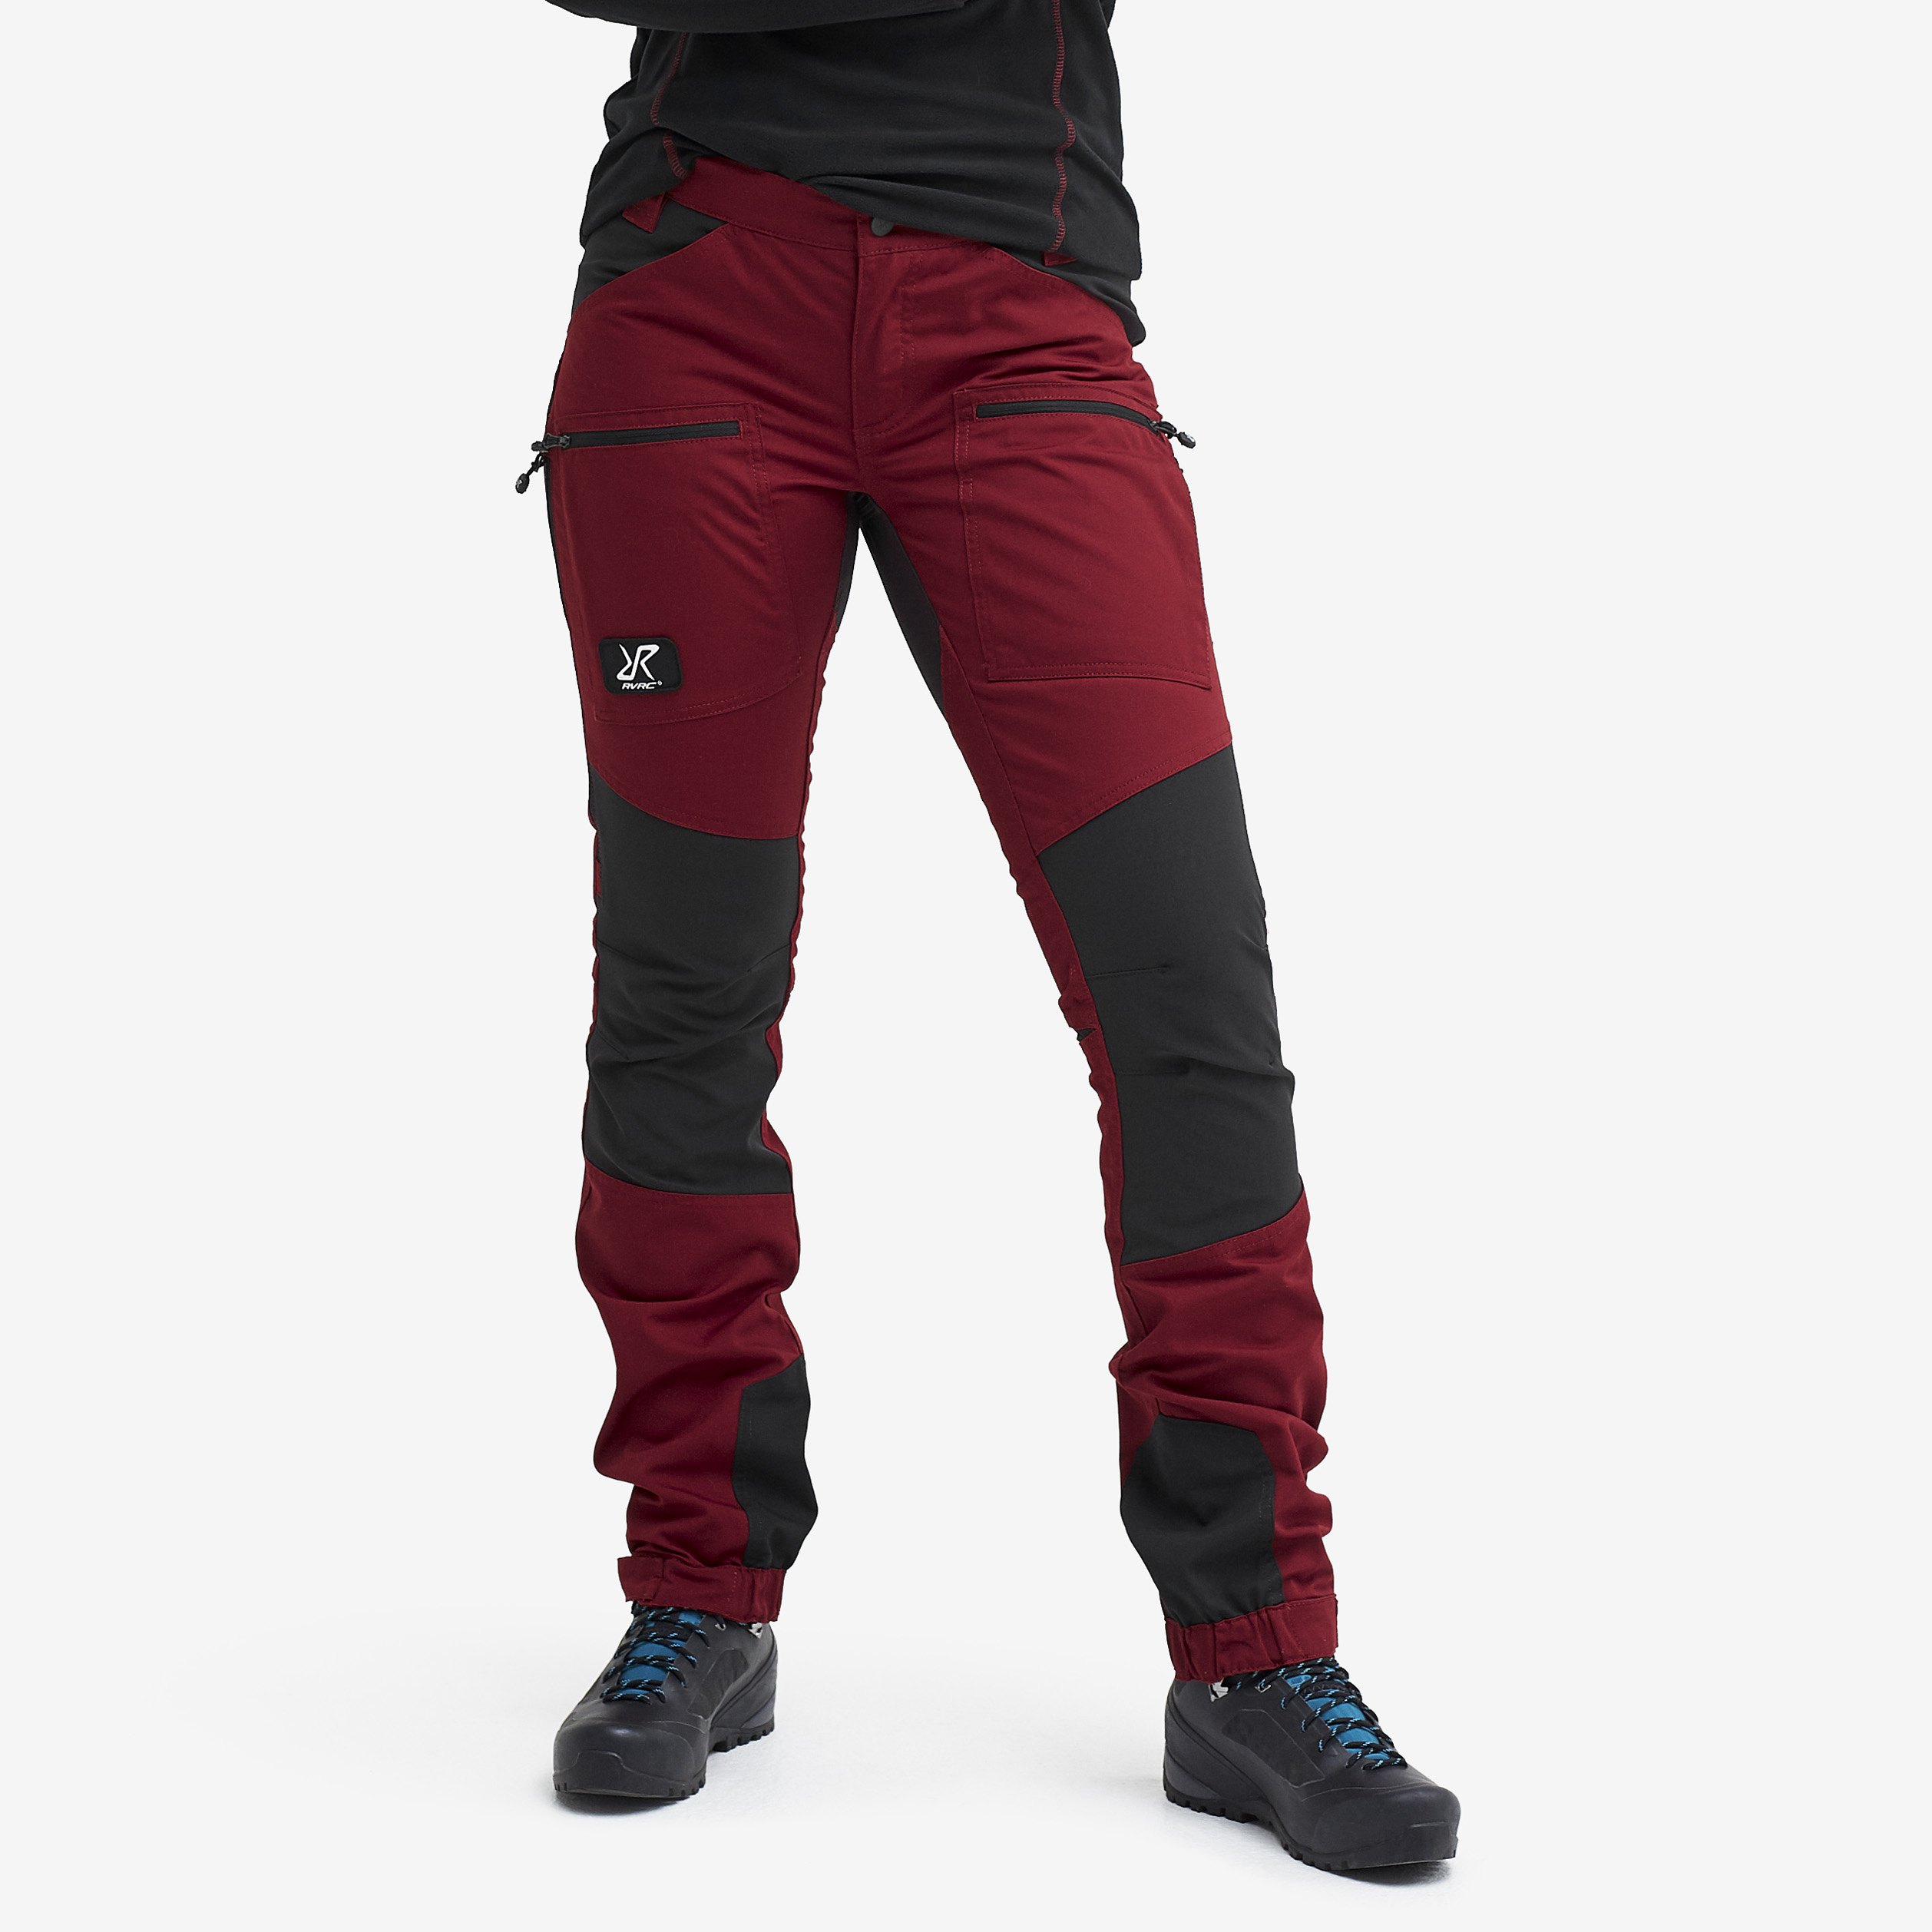 Nordwand Pro hiking pants for women in red